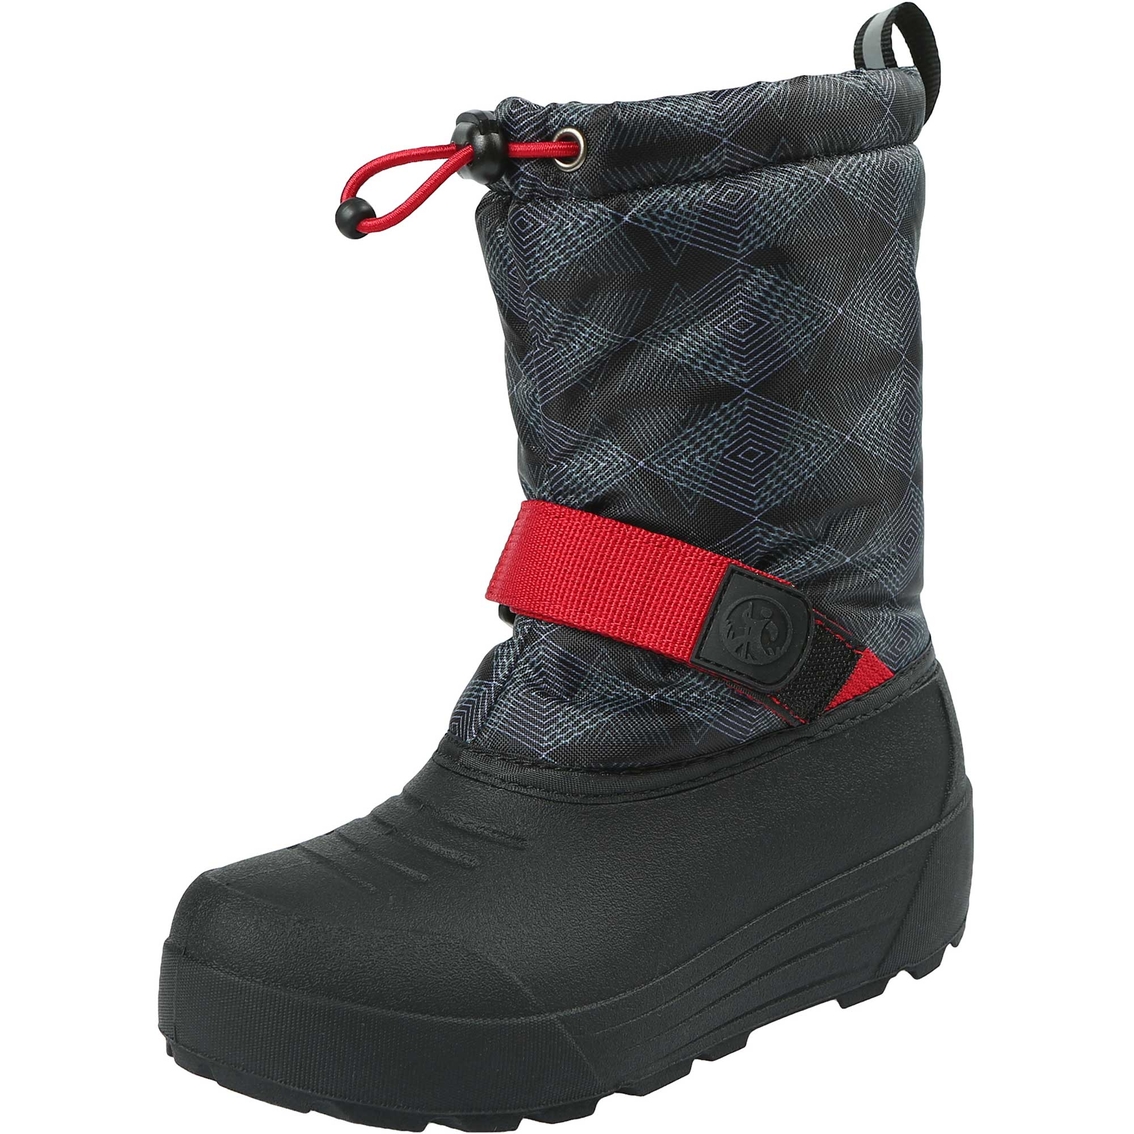 Northside Toddler / Preschool Boys Frosty Polar Boots | Boots | Shoes ...